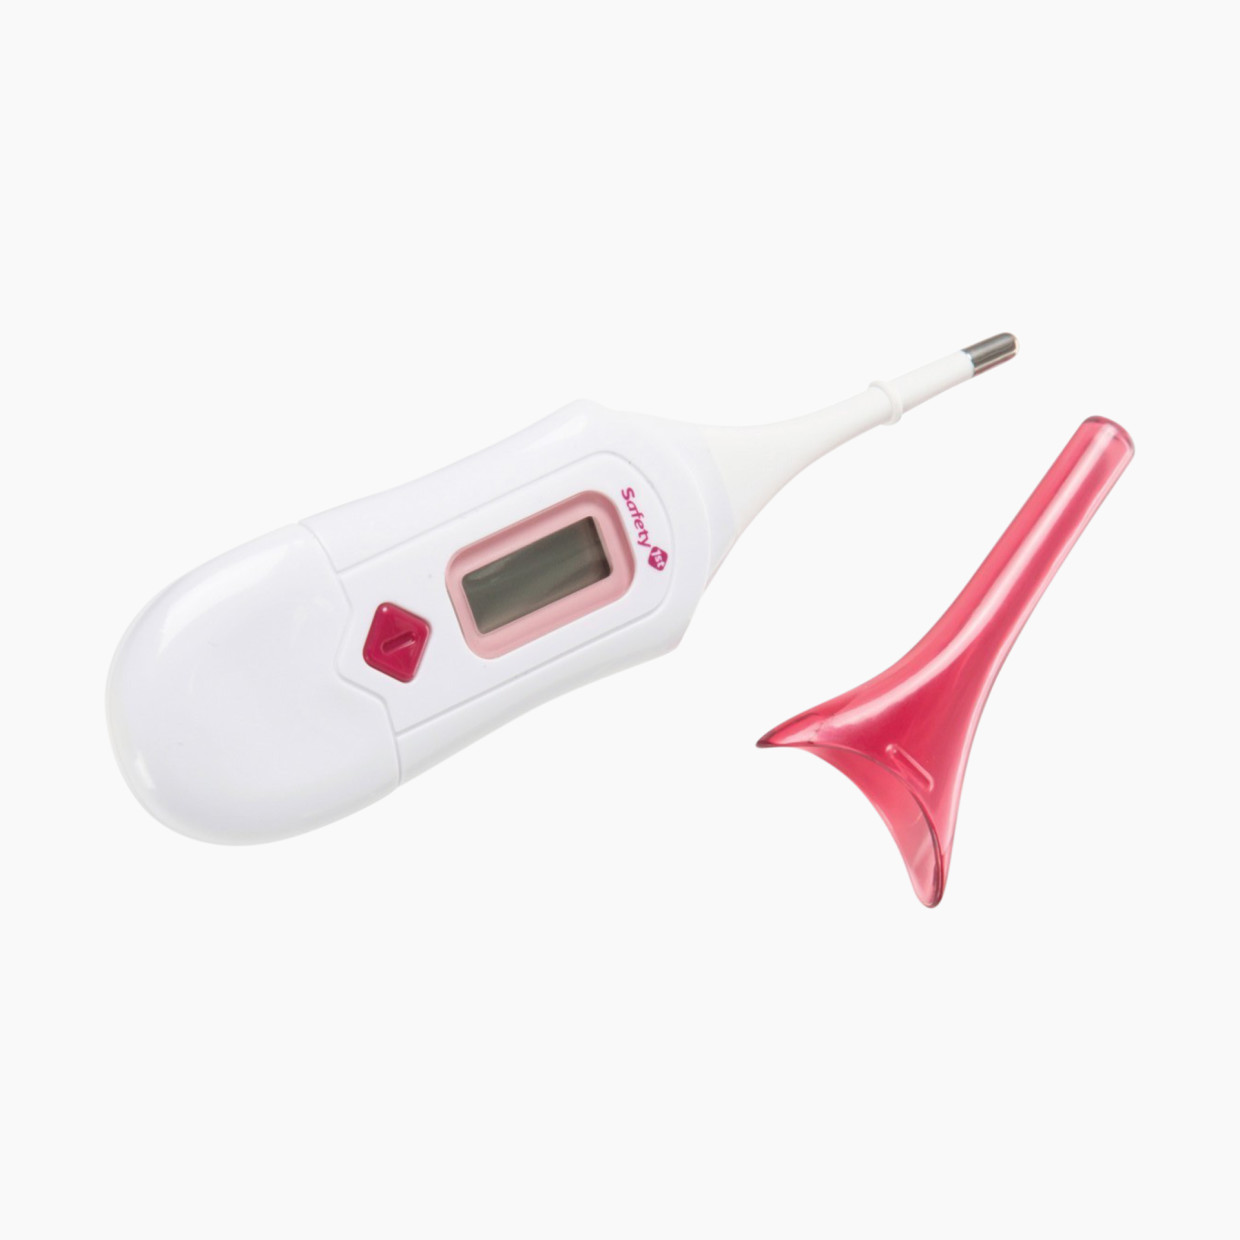 Safety 1st 3-in-1 Nursery Thermometer - Raspberry.